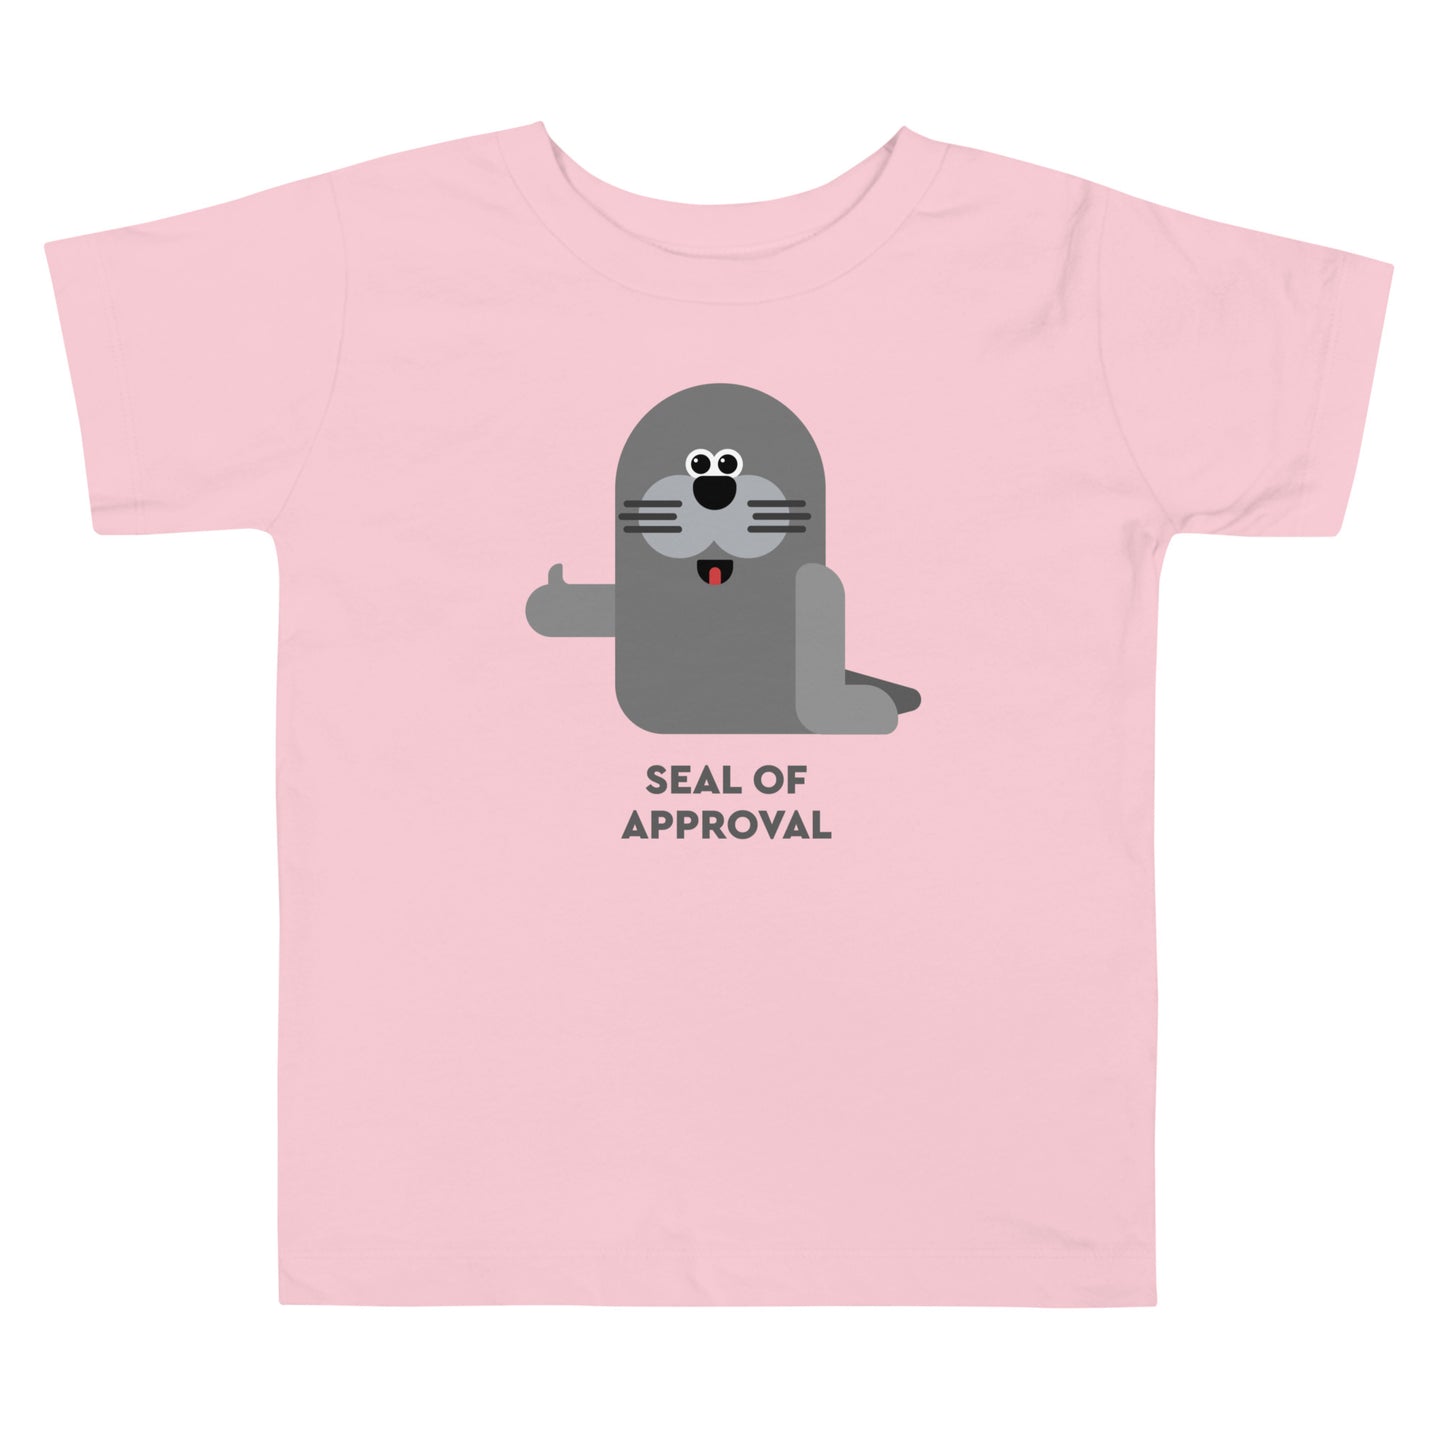 Toddler - Seal of Approval - Short Sleeve Tee